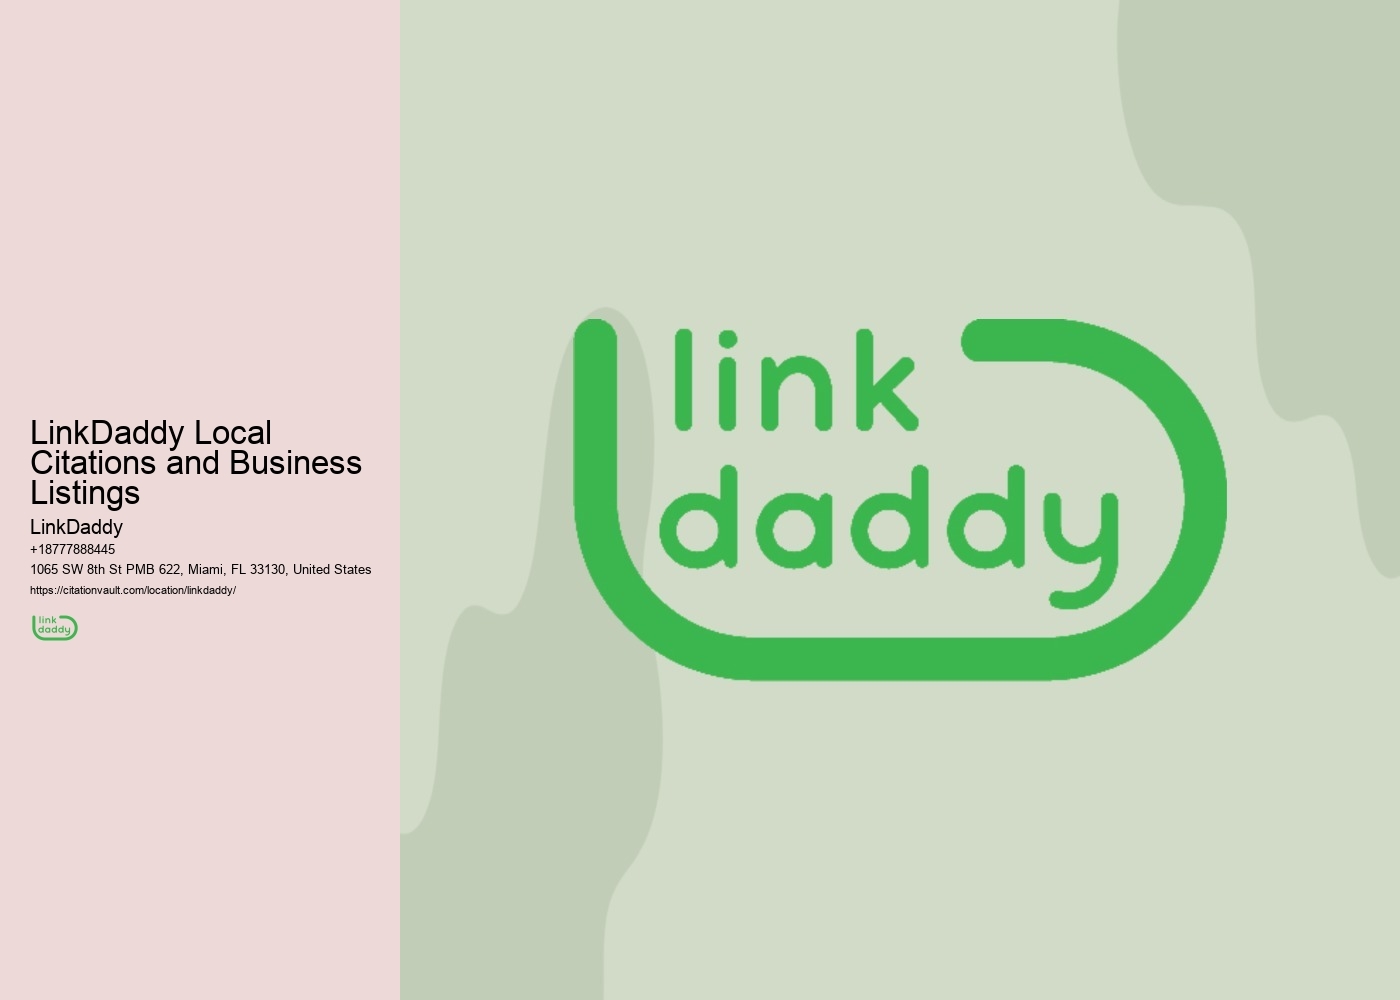 LinkDaddy Local Citations and Business Listings